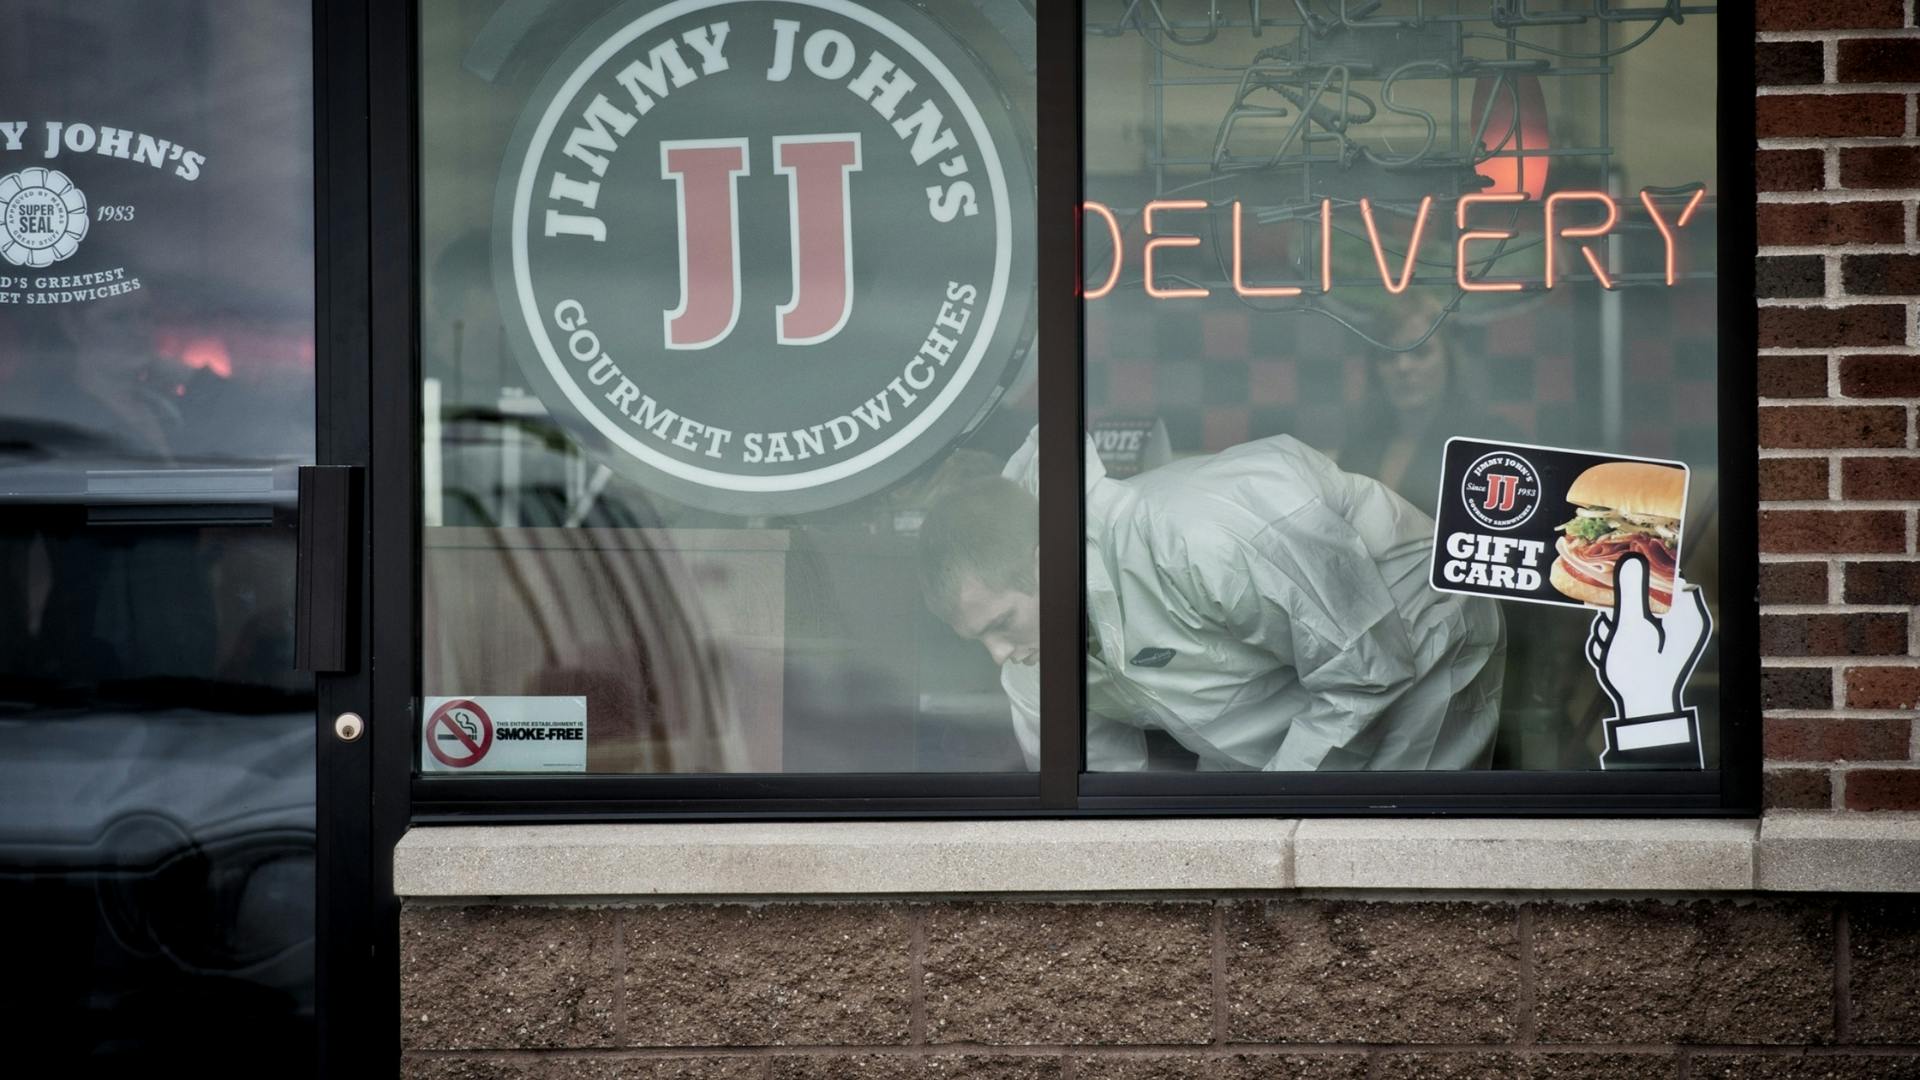 When police arrived they found a dead woman in Jimmy John's and a man who appeared to have a self-inflicted gunshot wound.